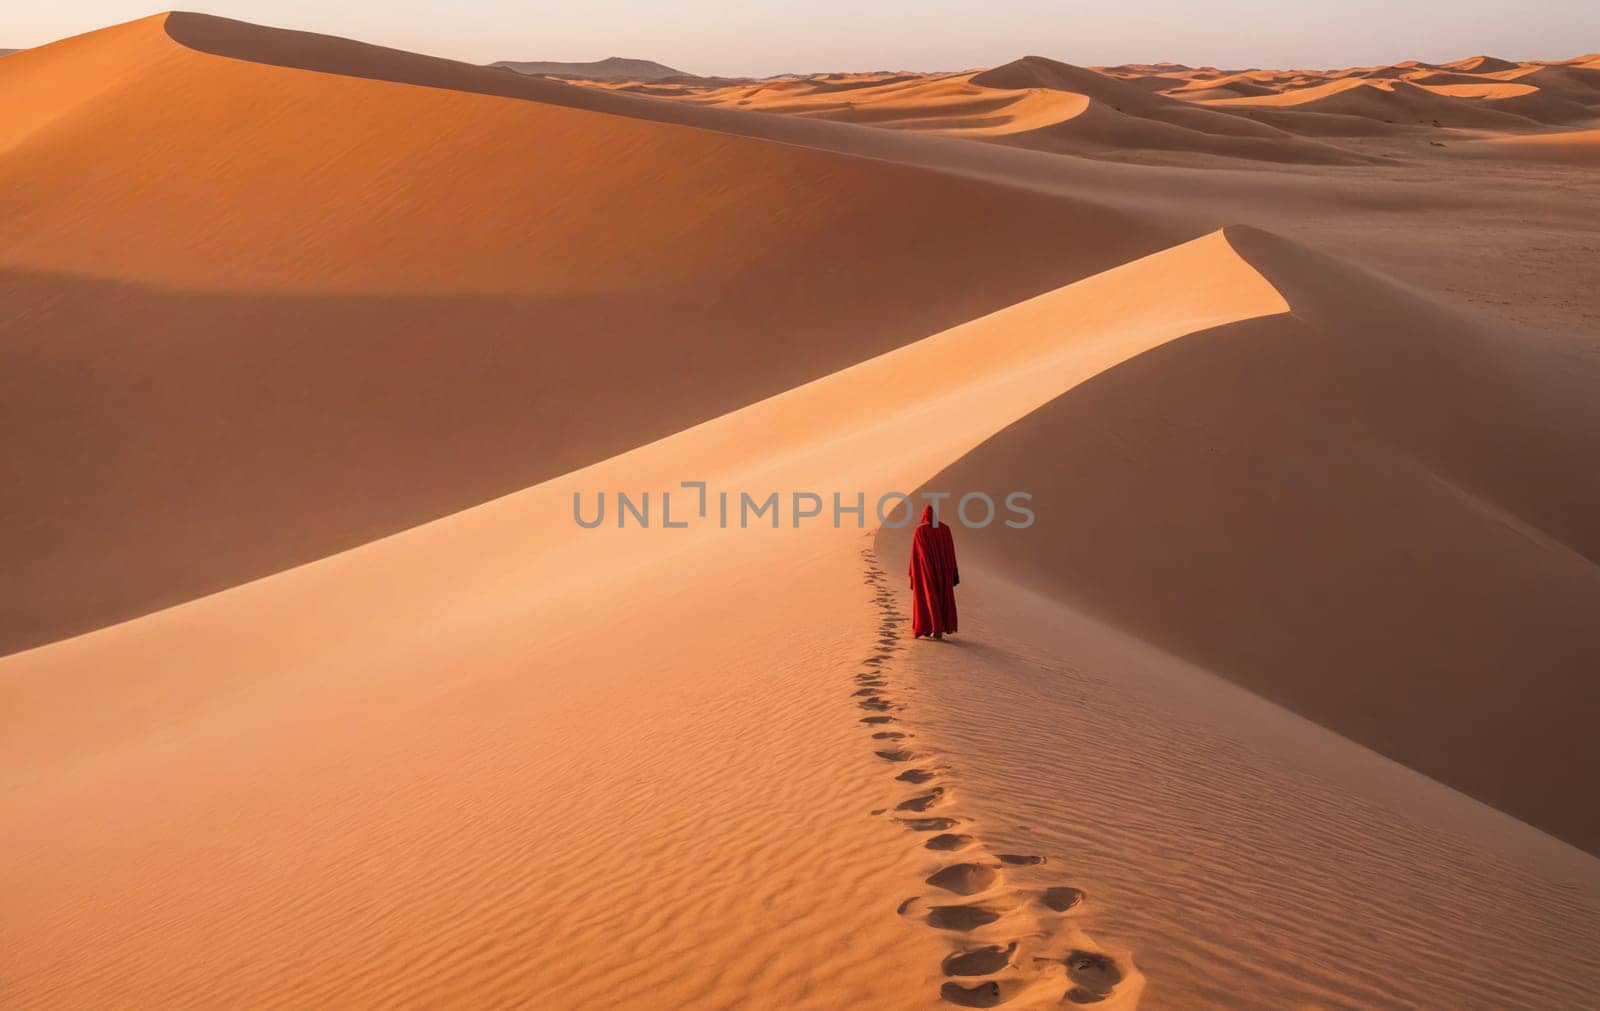 A figure in a crimson robe is strolling atop a sandy erg in the desert landscape, under the vast sky filled with fluffy clouds on the horizon